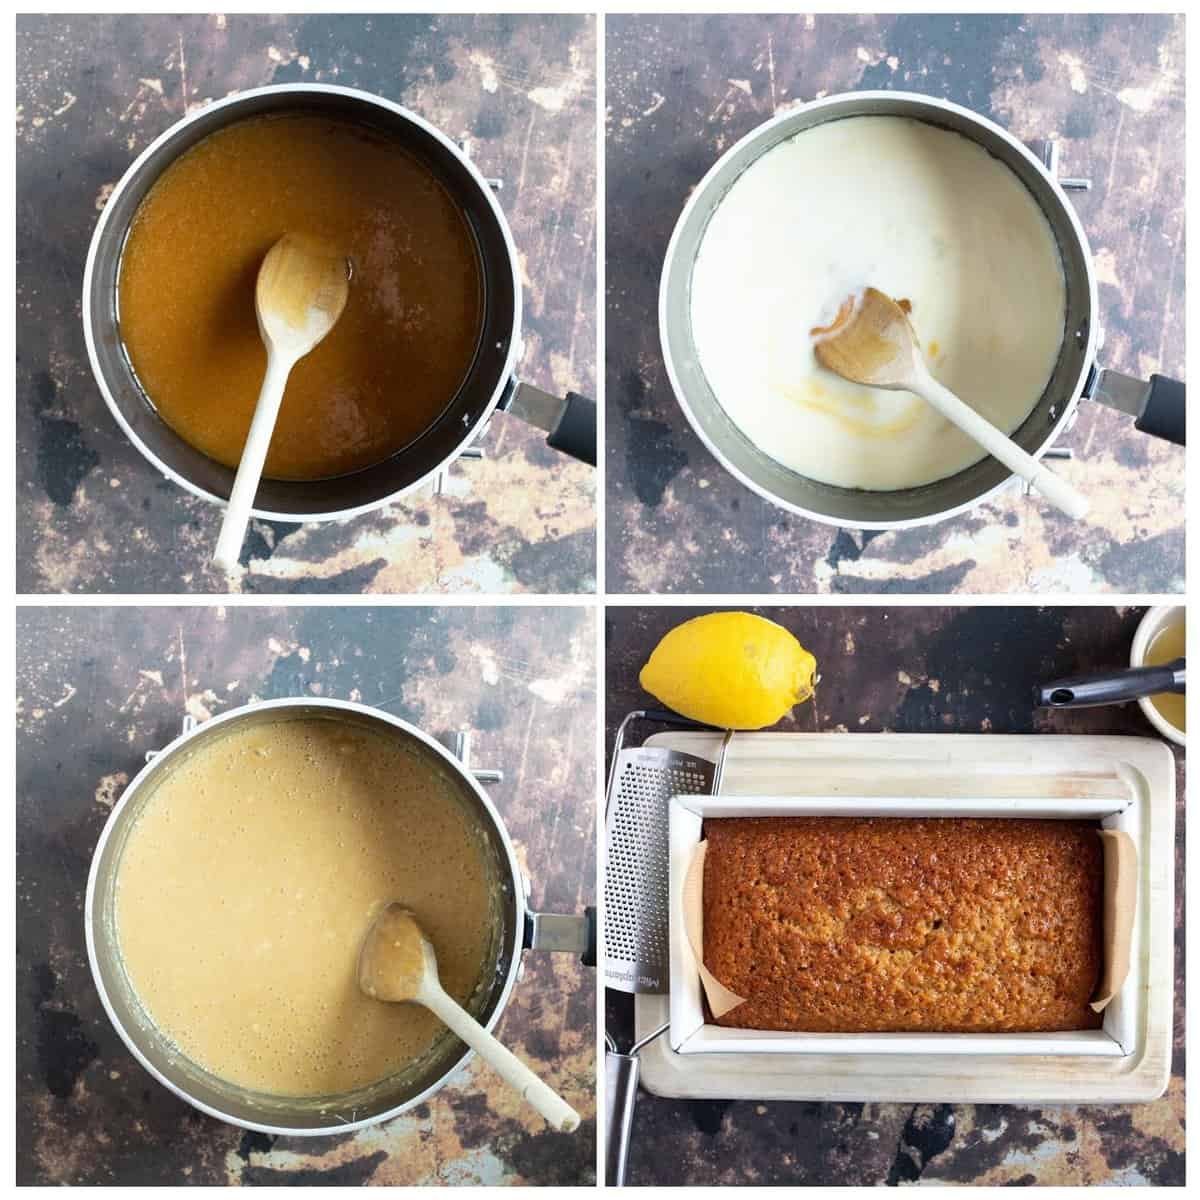 Step by step photo instructions for making the golden syrup cake in a loaf tin.